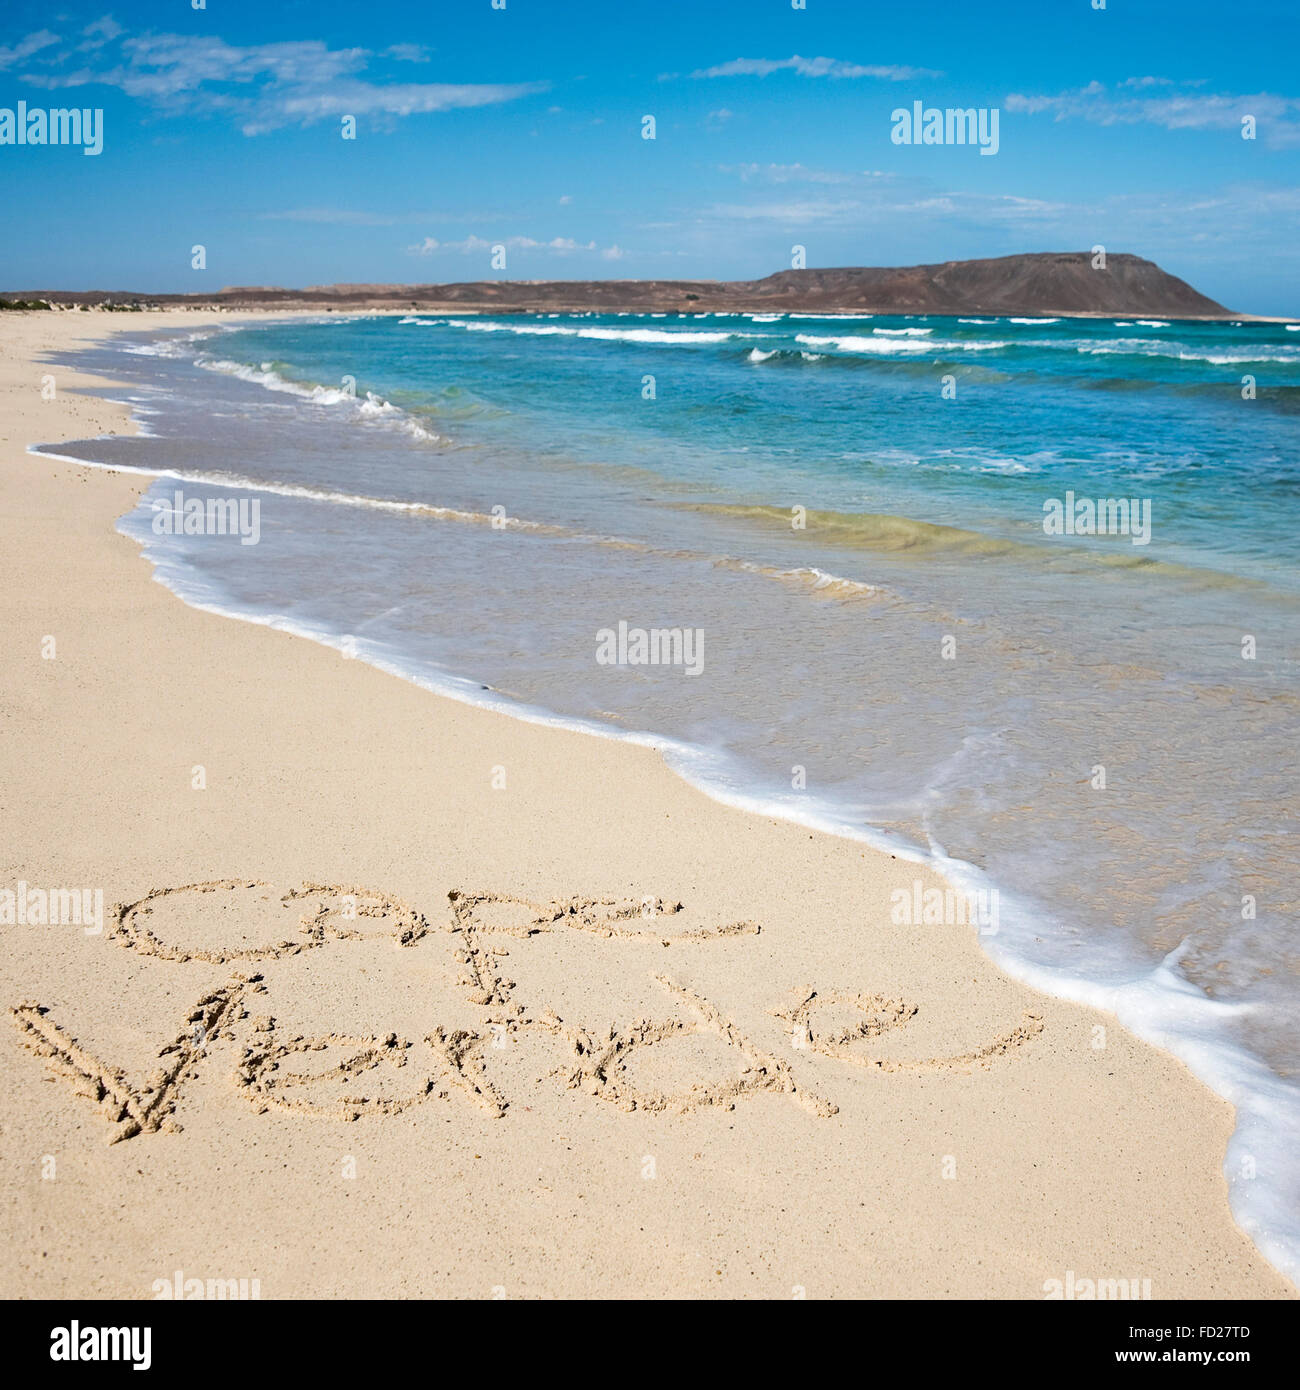 Square view of Cape Verde written in the sand at Kite Beach. Stock Photo